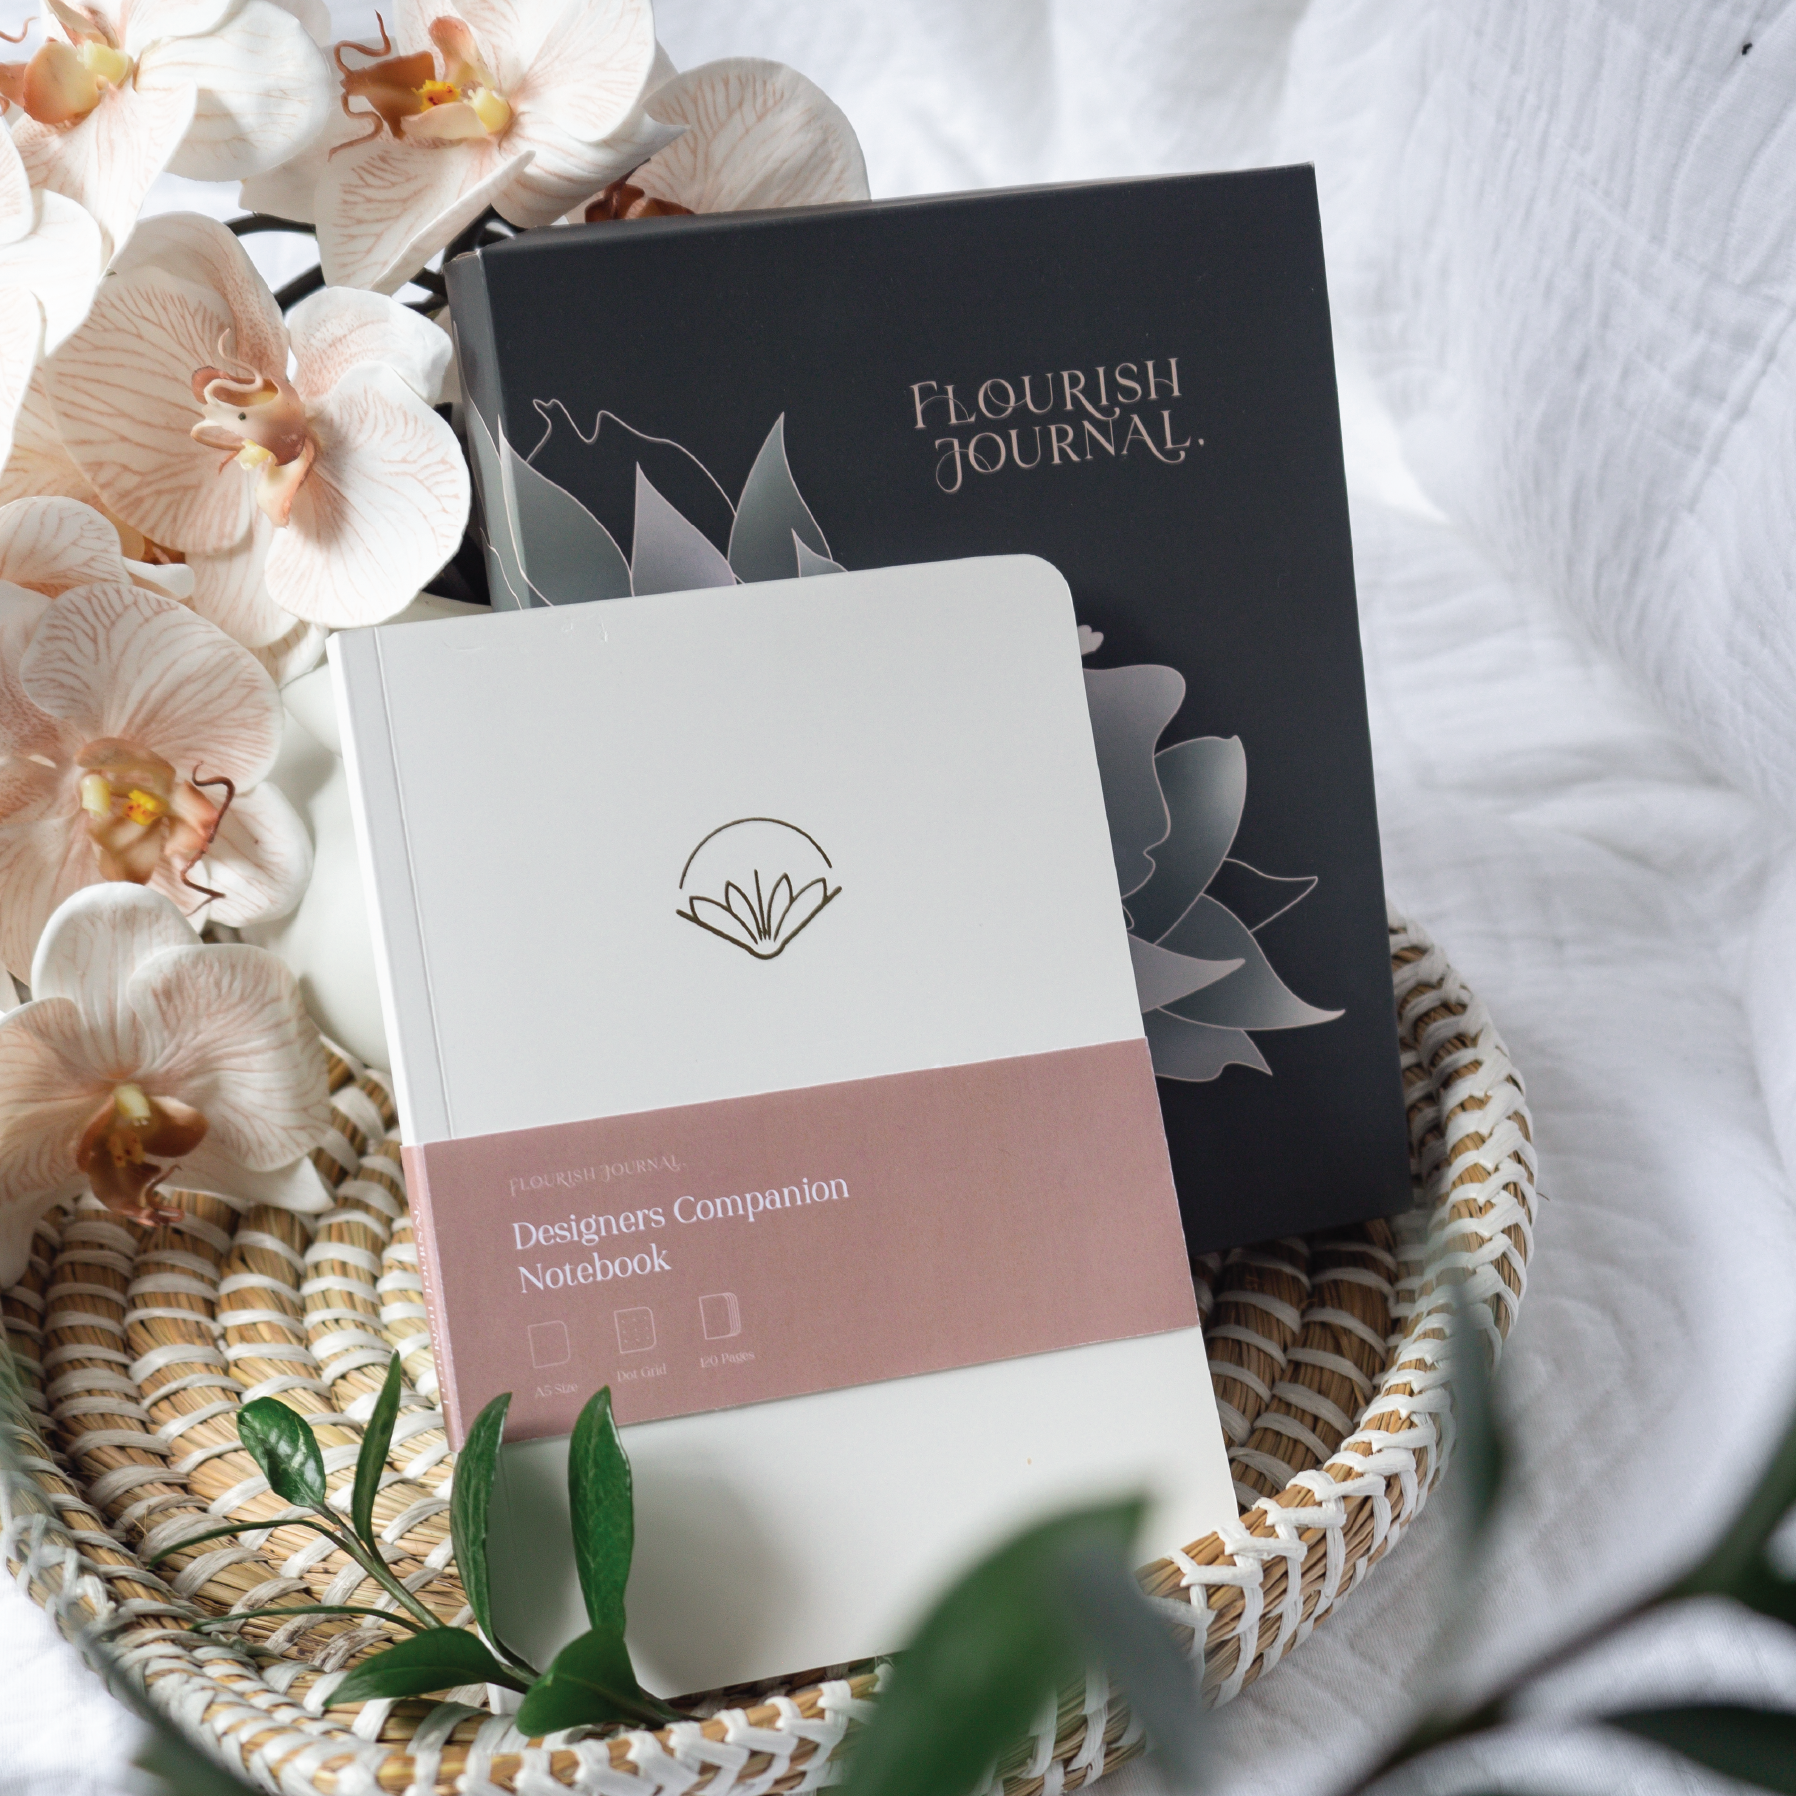 A designer's notebook and journal set, elegantly presented with orchids, in a woven basket on a white cloth background.